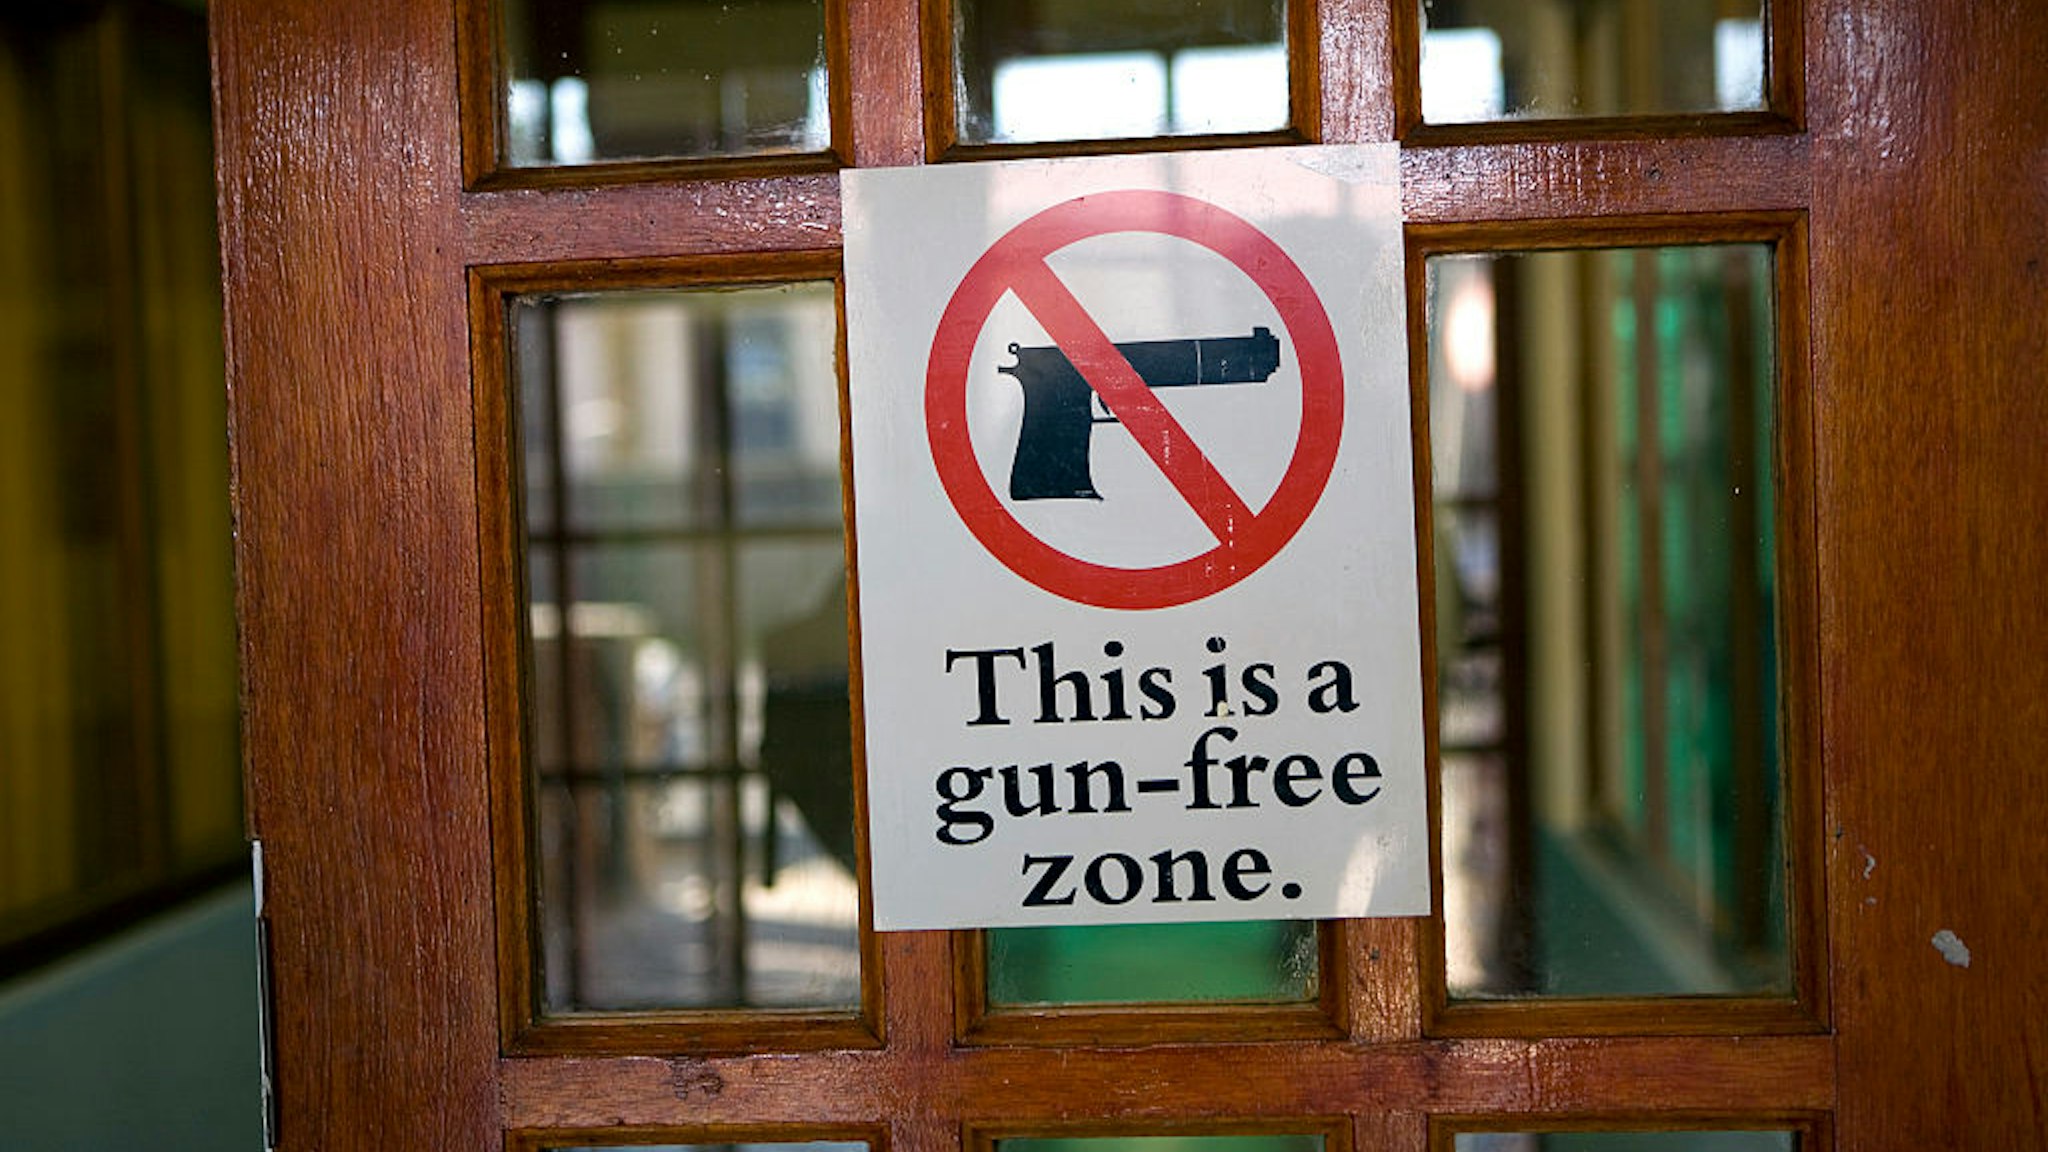 A Gun free zone sign on the entrance door of the Lavender Hill township Community Centre in the Cape Town region of South Africa. (Photo by In Pictures Ltd./Corbis via Getty Images)